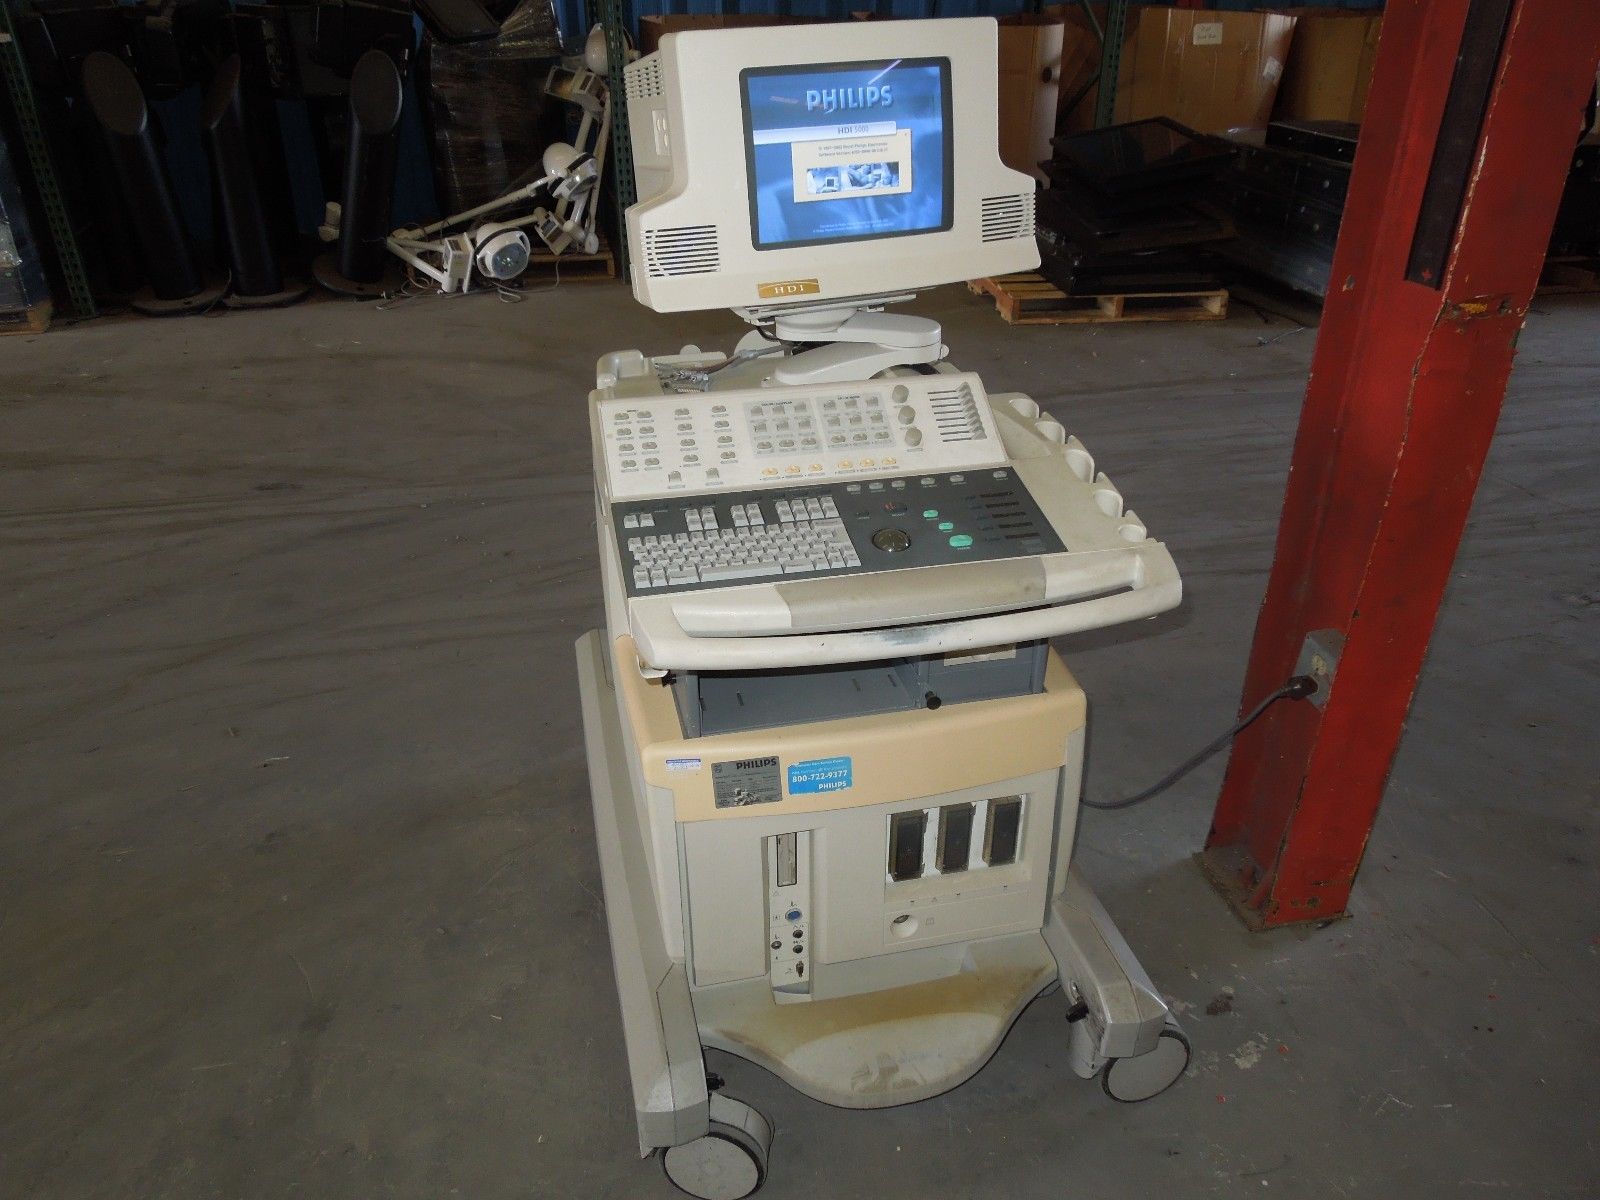 a computer sitting on top of a cart in a warehouse